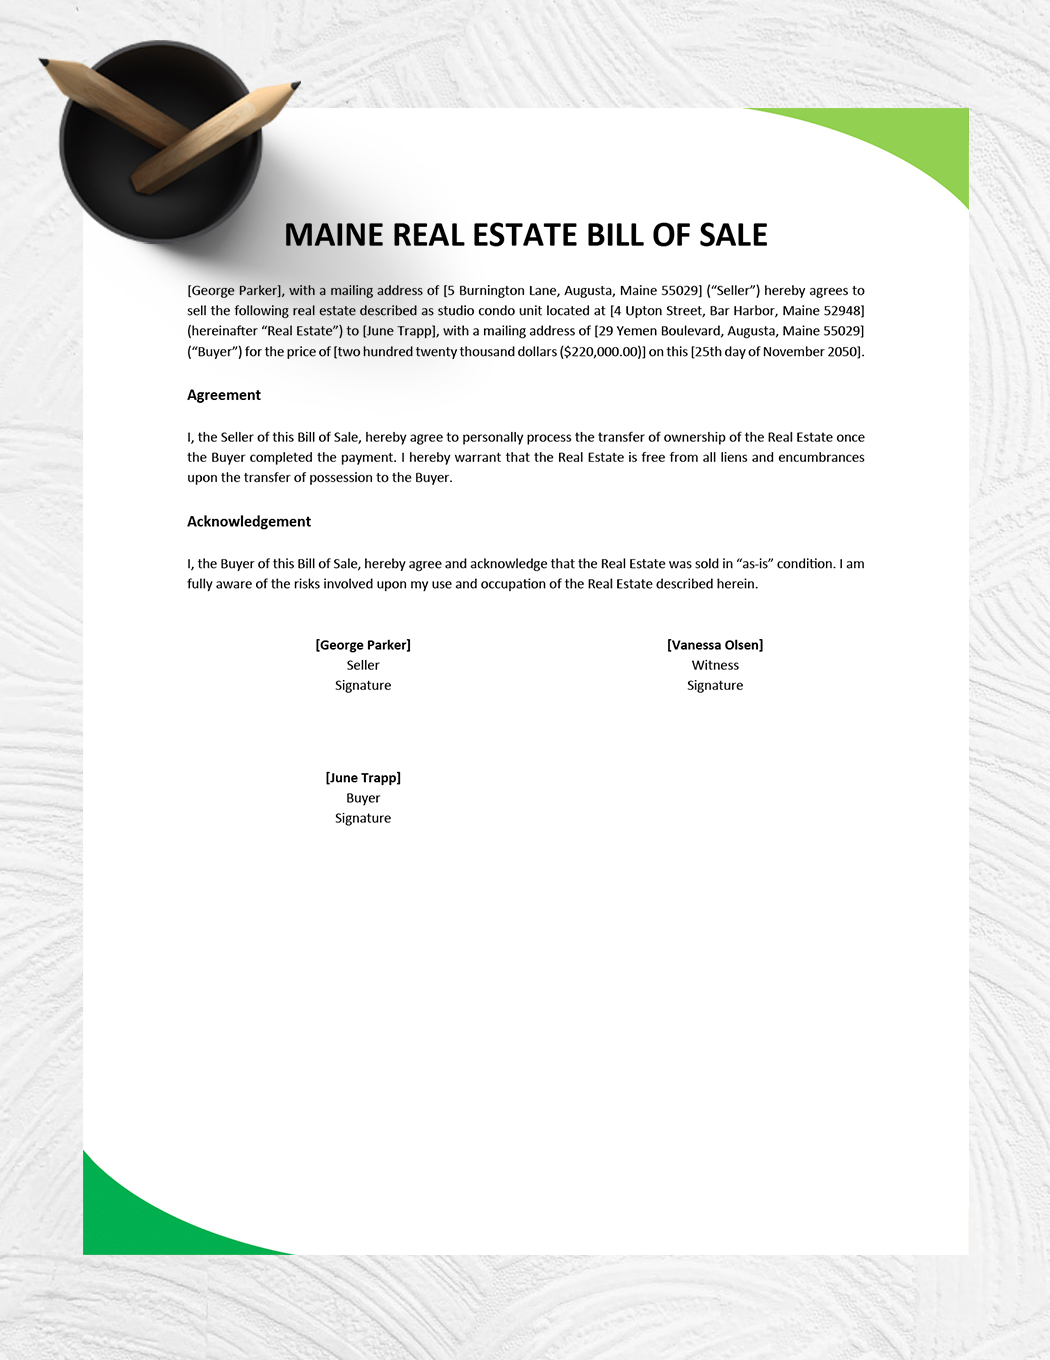 Maine Real Estate Bill of Sale Template